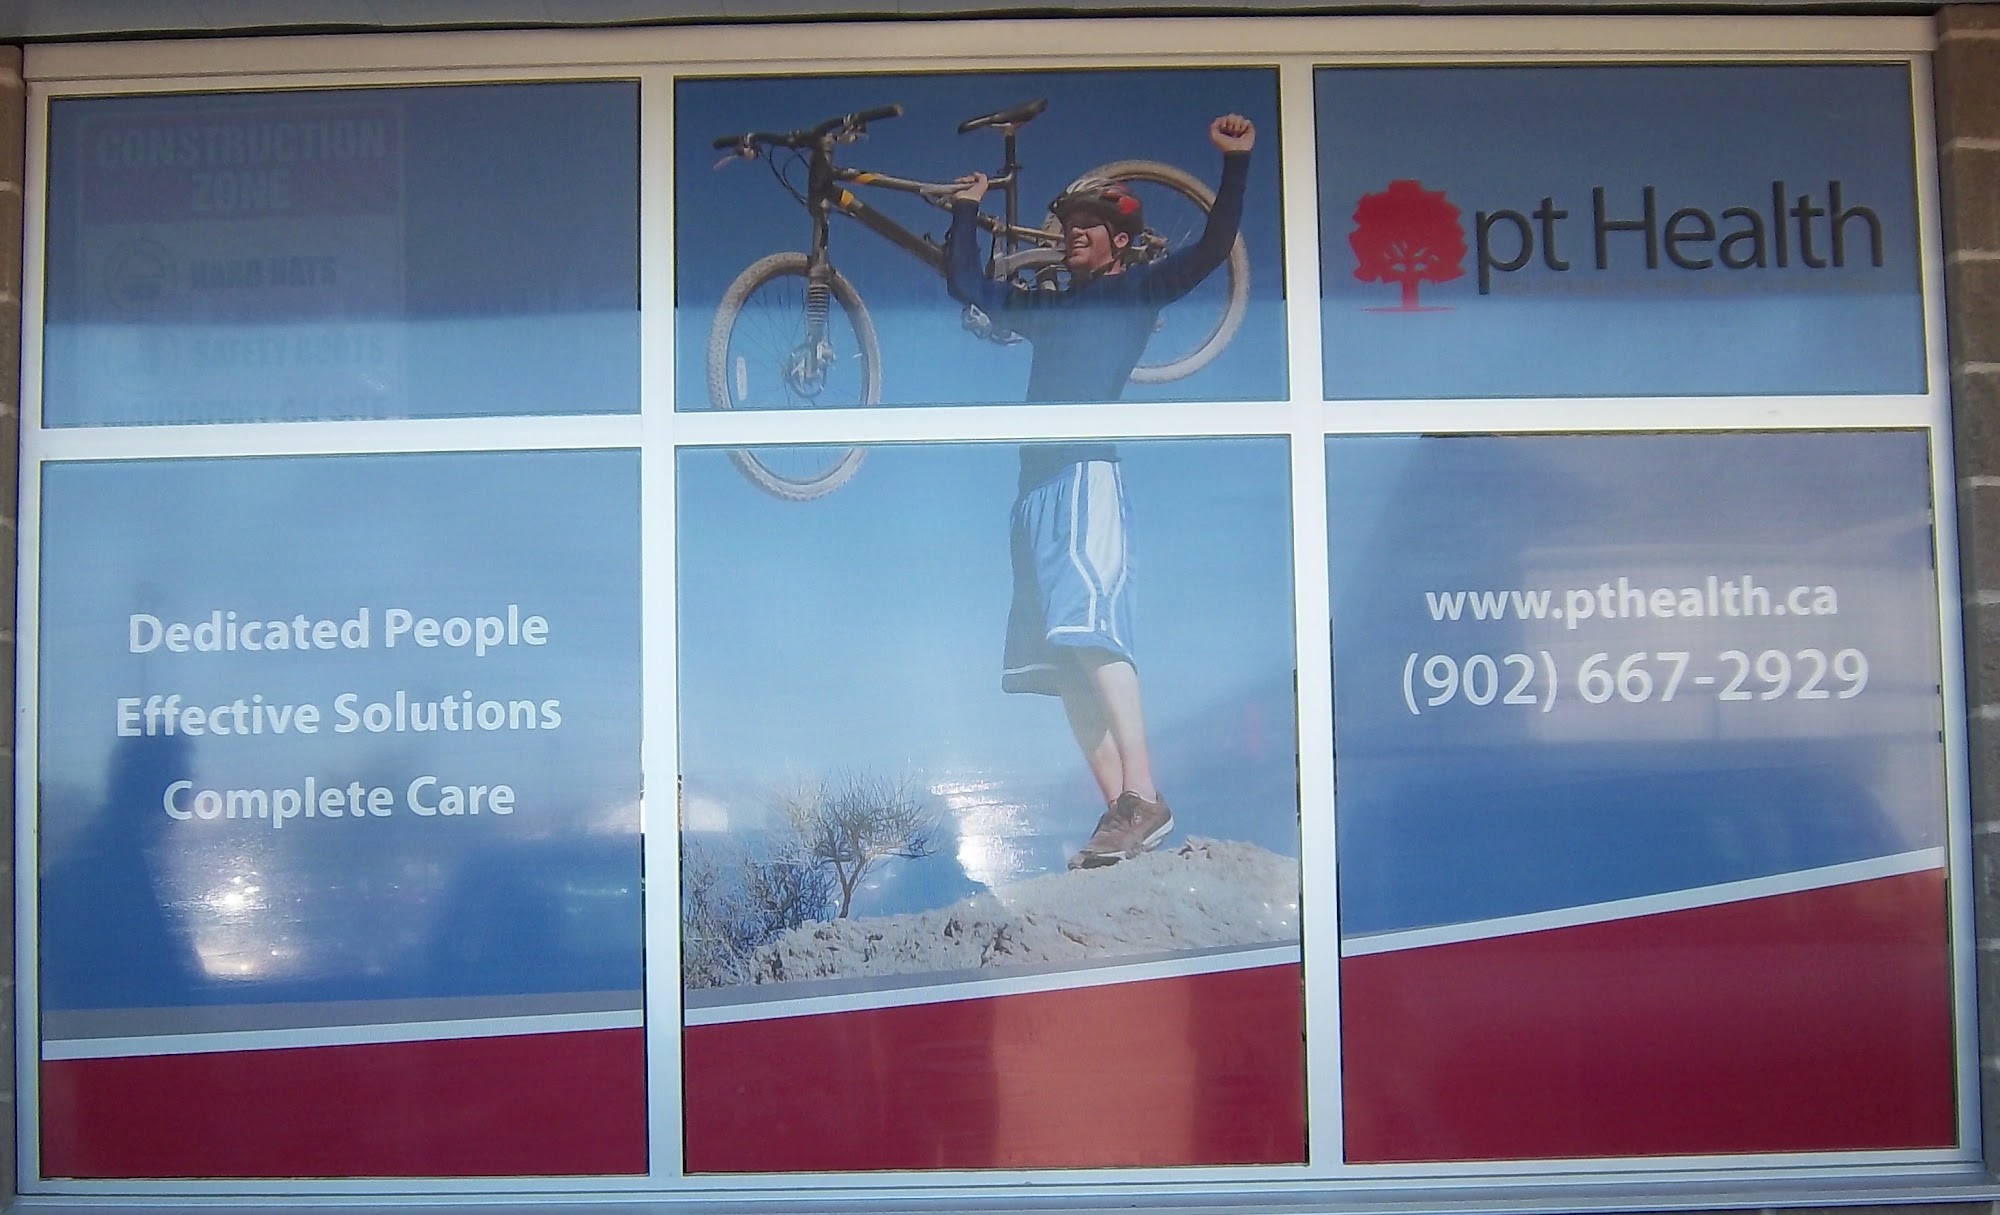 pt Health Physiotherapy Amherst 150 Robert Angus Dr #200, Amherst Nova Scotia B4H 4R7